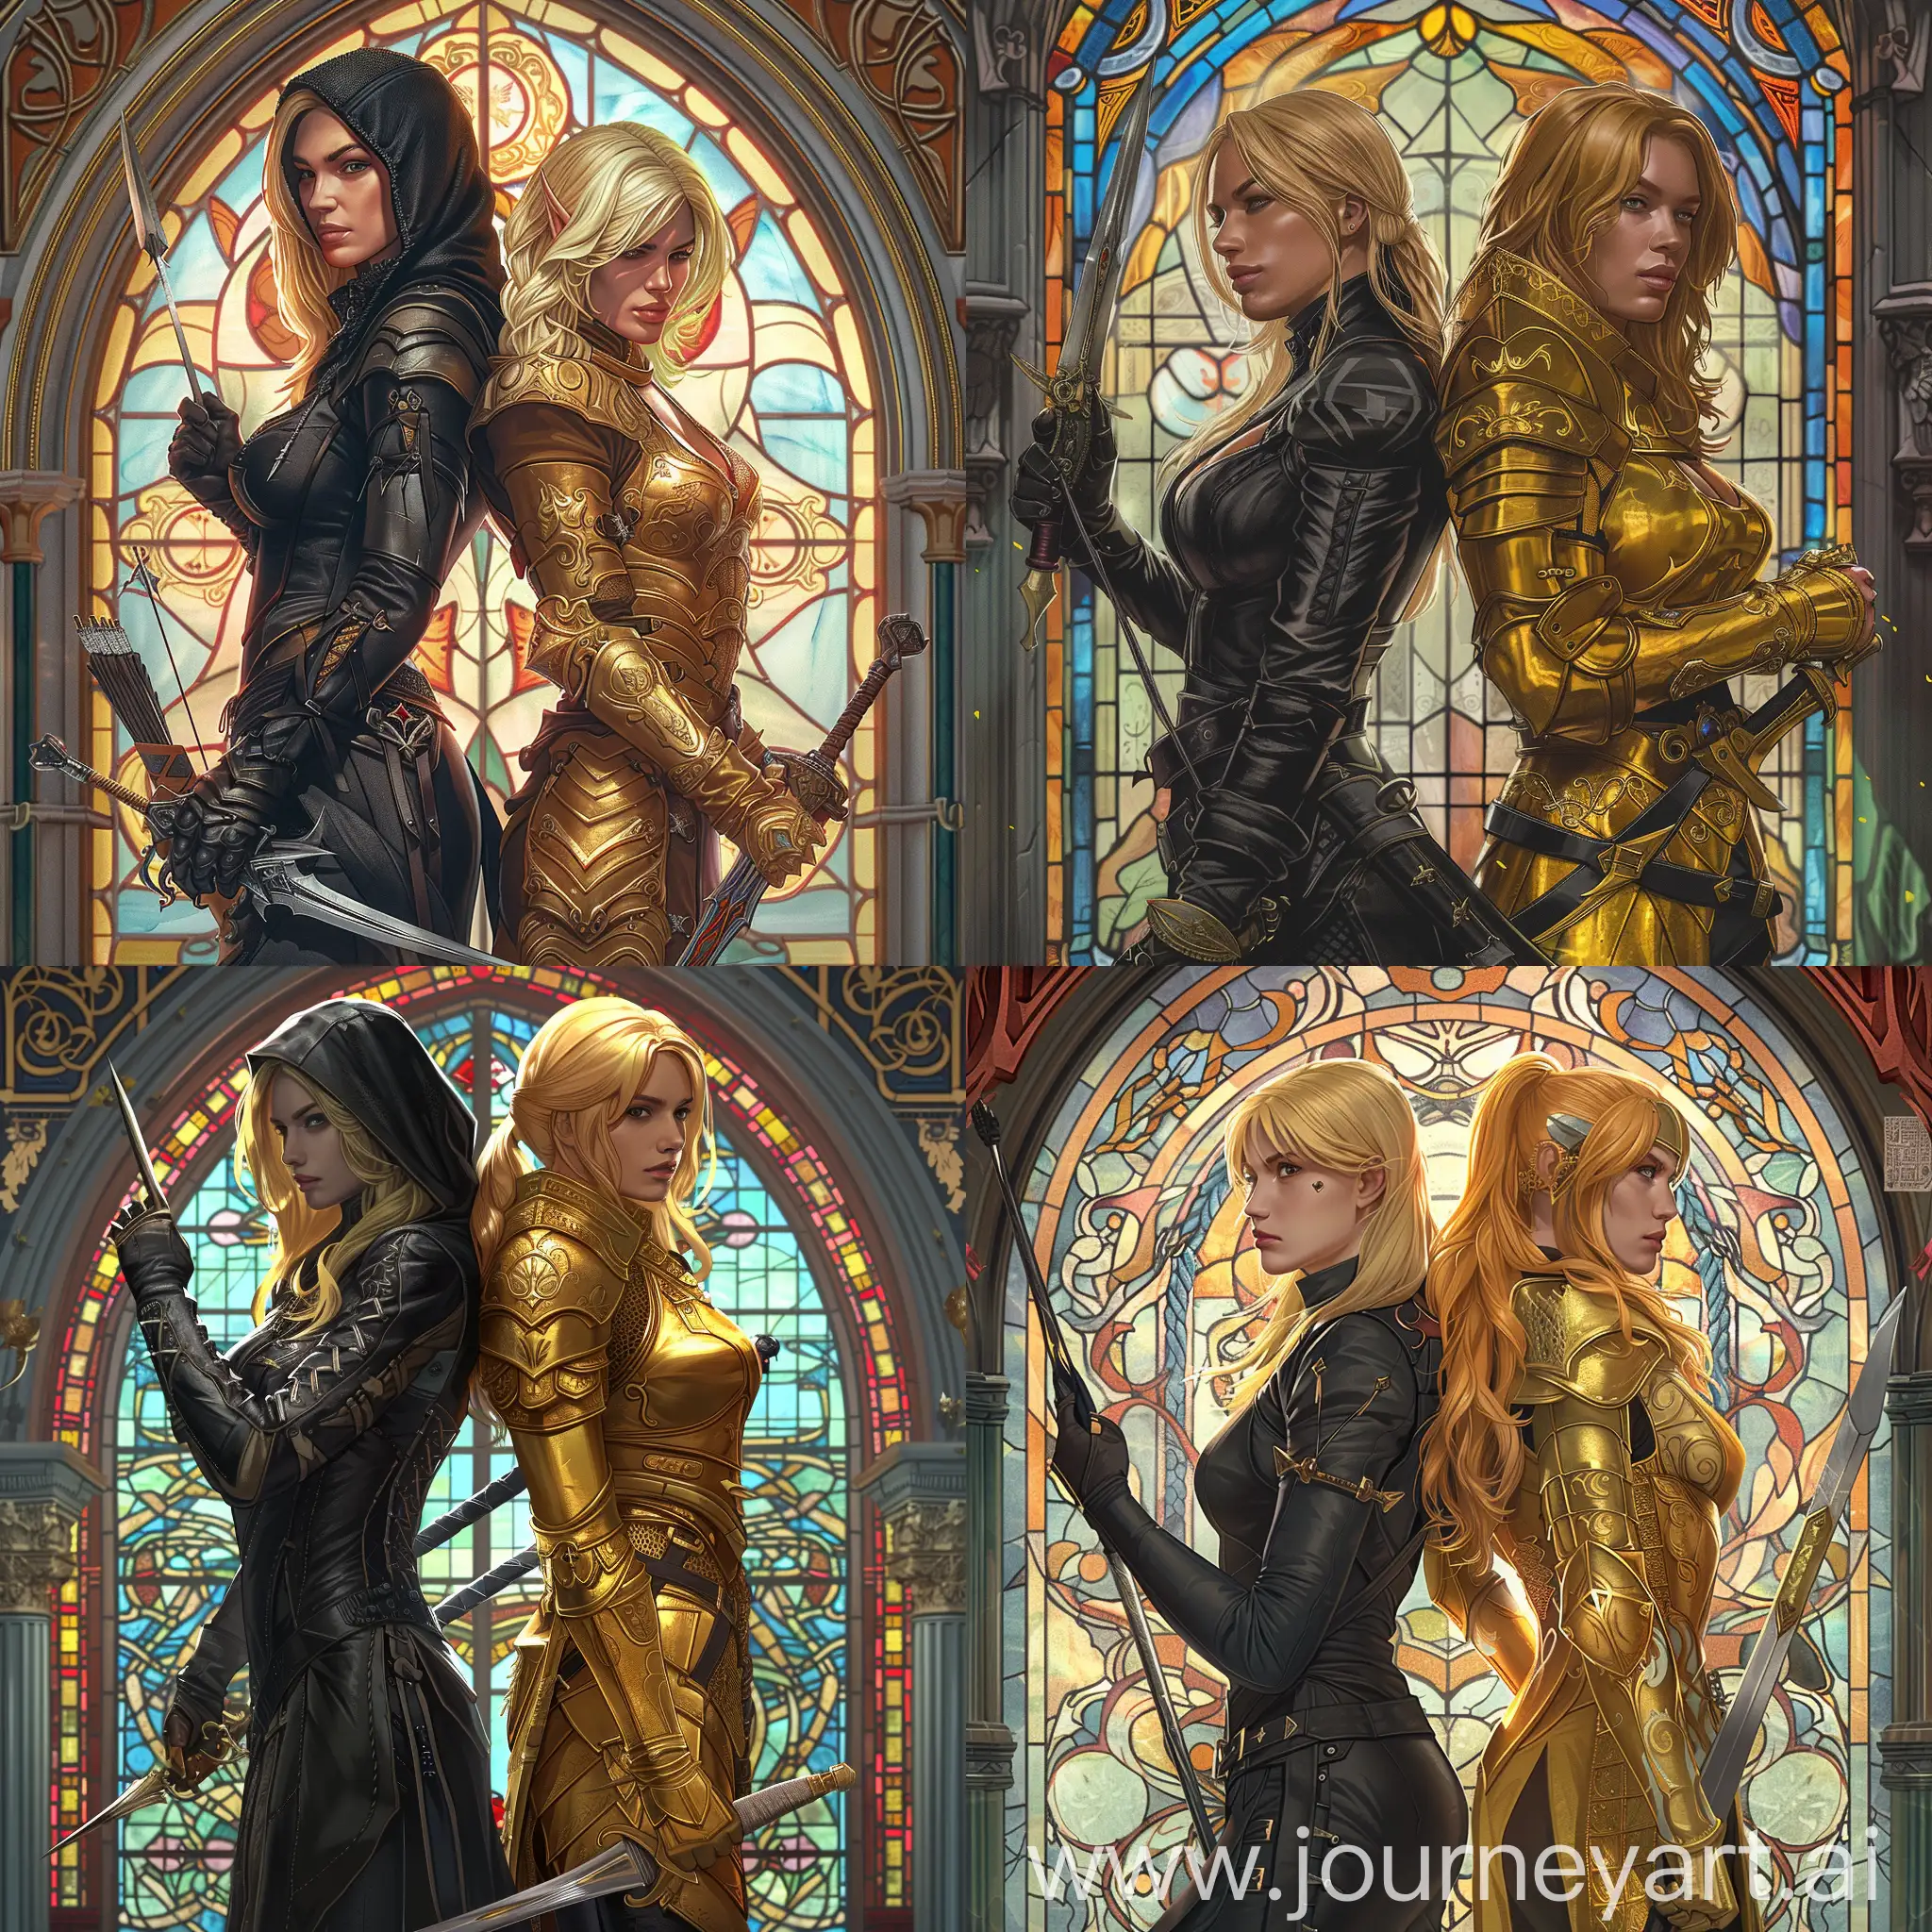 imagine realistic cinmatic image of two woman standing back to back features a beautiful blonde assassin in black Altair dagger in her hand and other women with golden hair in golden armor with a sword in her hand, standing back to back ,two characters of same woman stained glass background